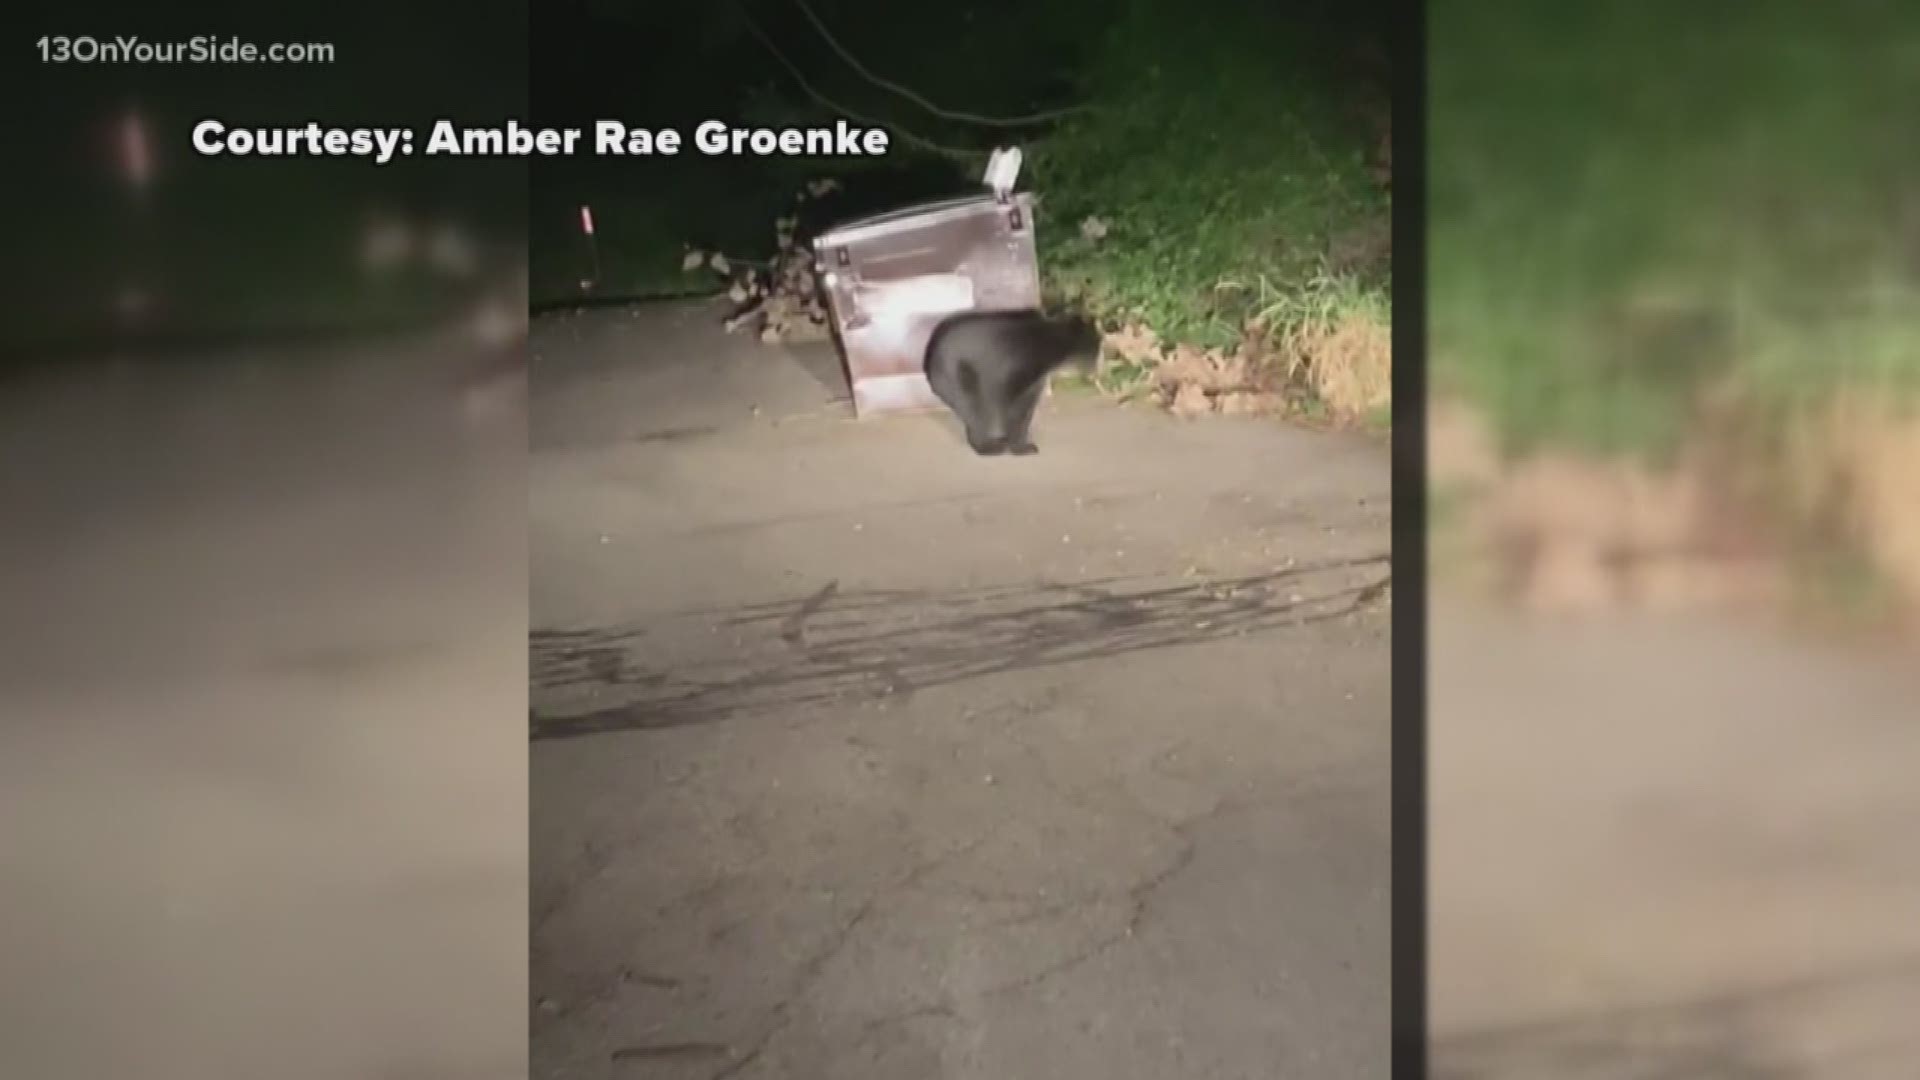 A bear has been sighted on Wednesday night at 4 Mile Road and Alpine Avenue, according to Kent County Dispatch. They say this isn't the bear's first appearance over the past few days.